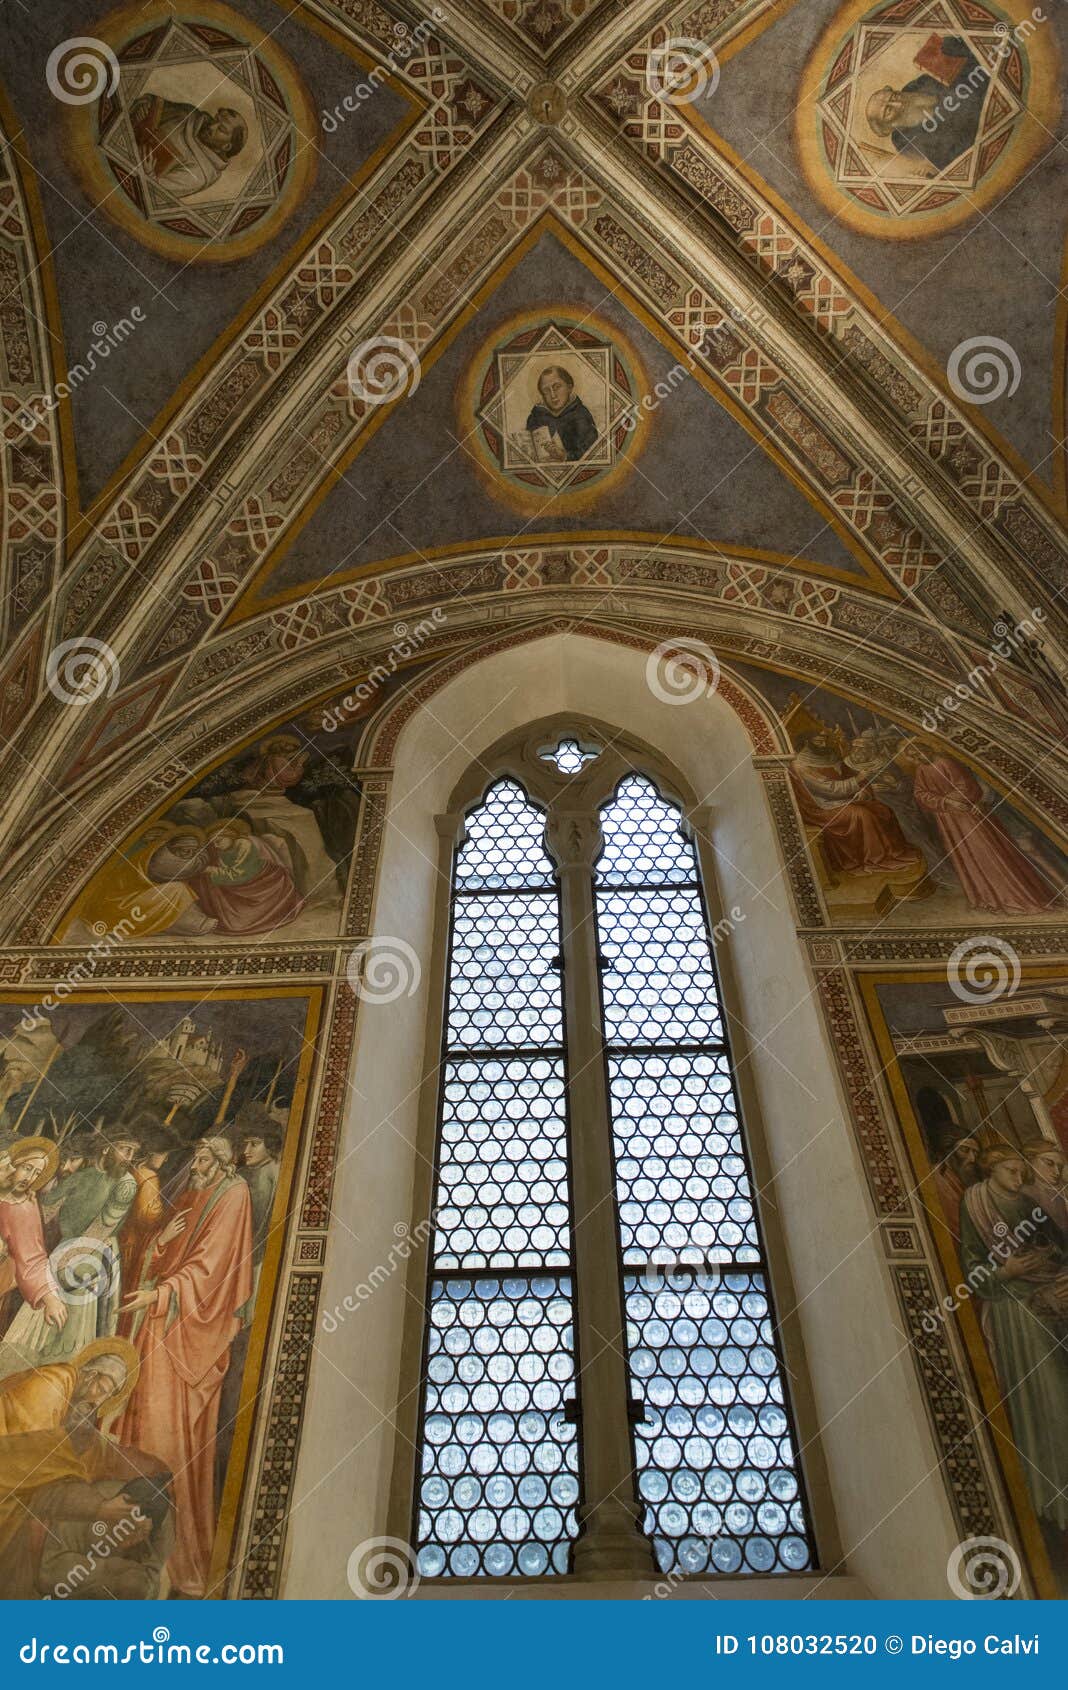 decorative frescoes in florence, italy